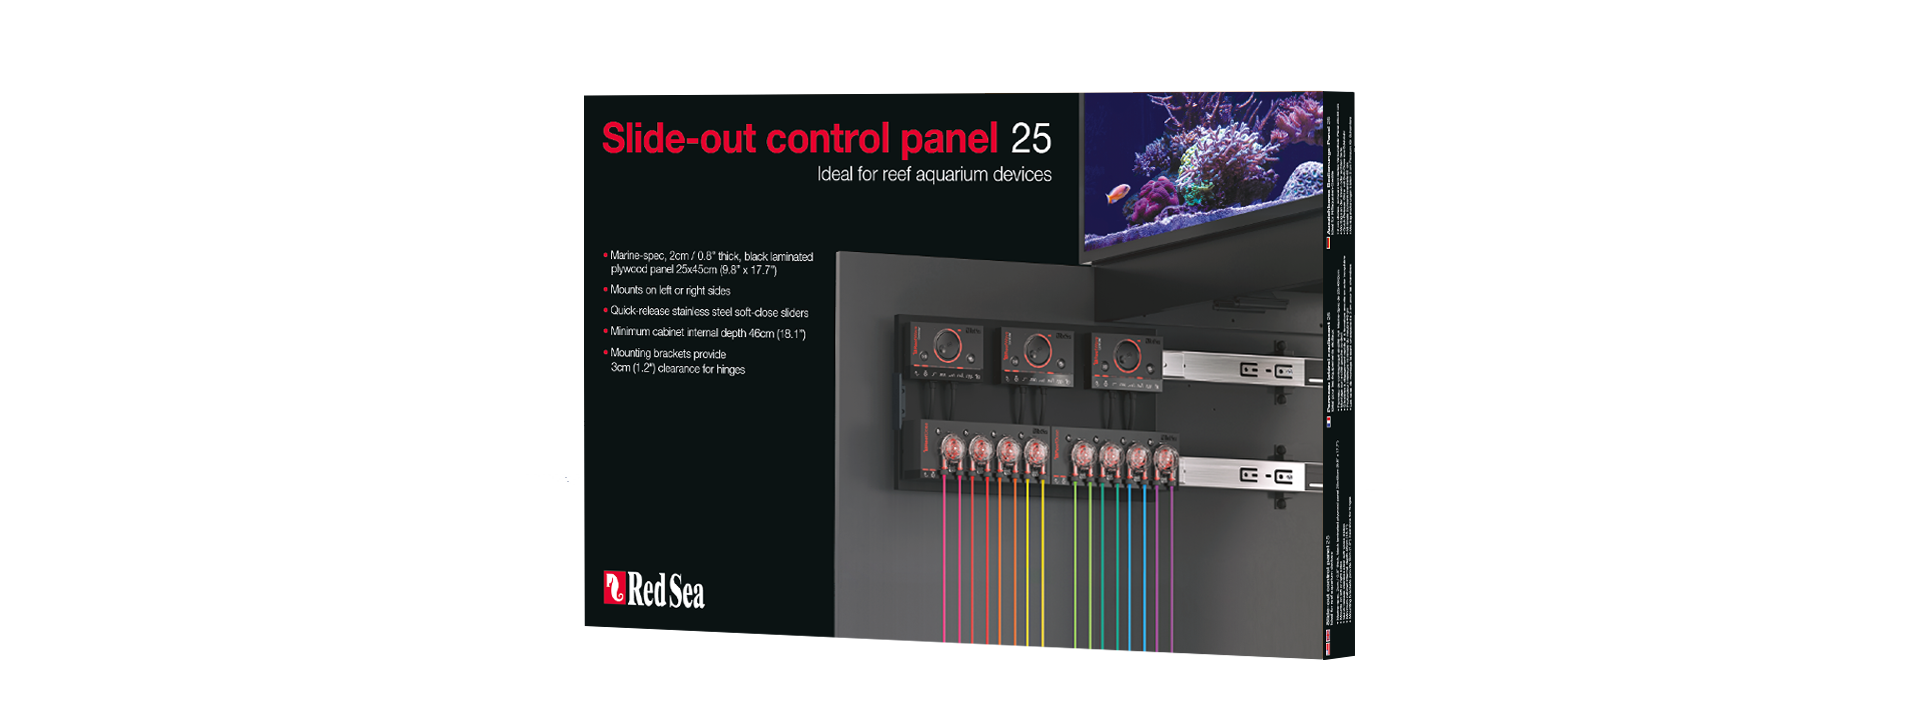 Red sea Cabinet slide out mounting control panel 25